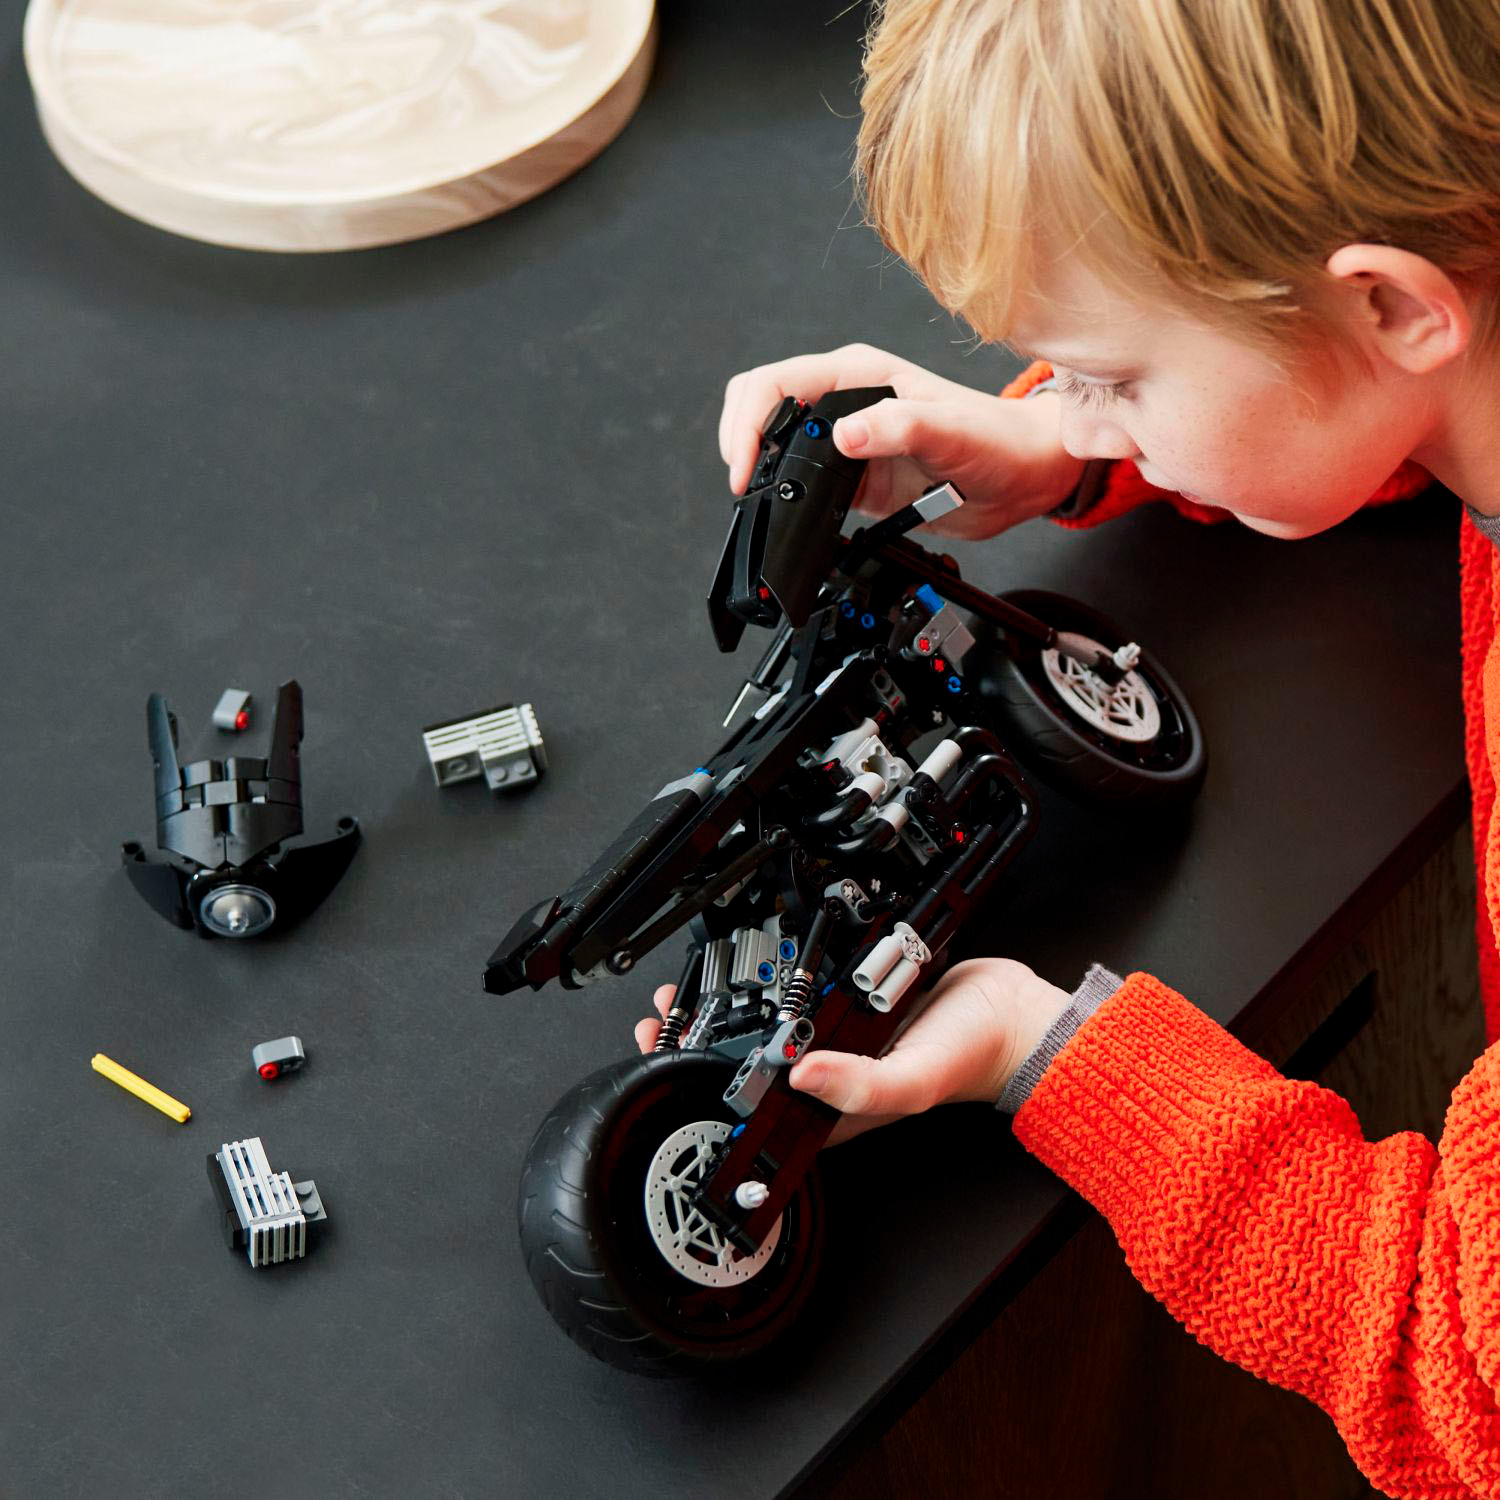 LEGO Technic 42155 Batman – The Batcycle review and gallery